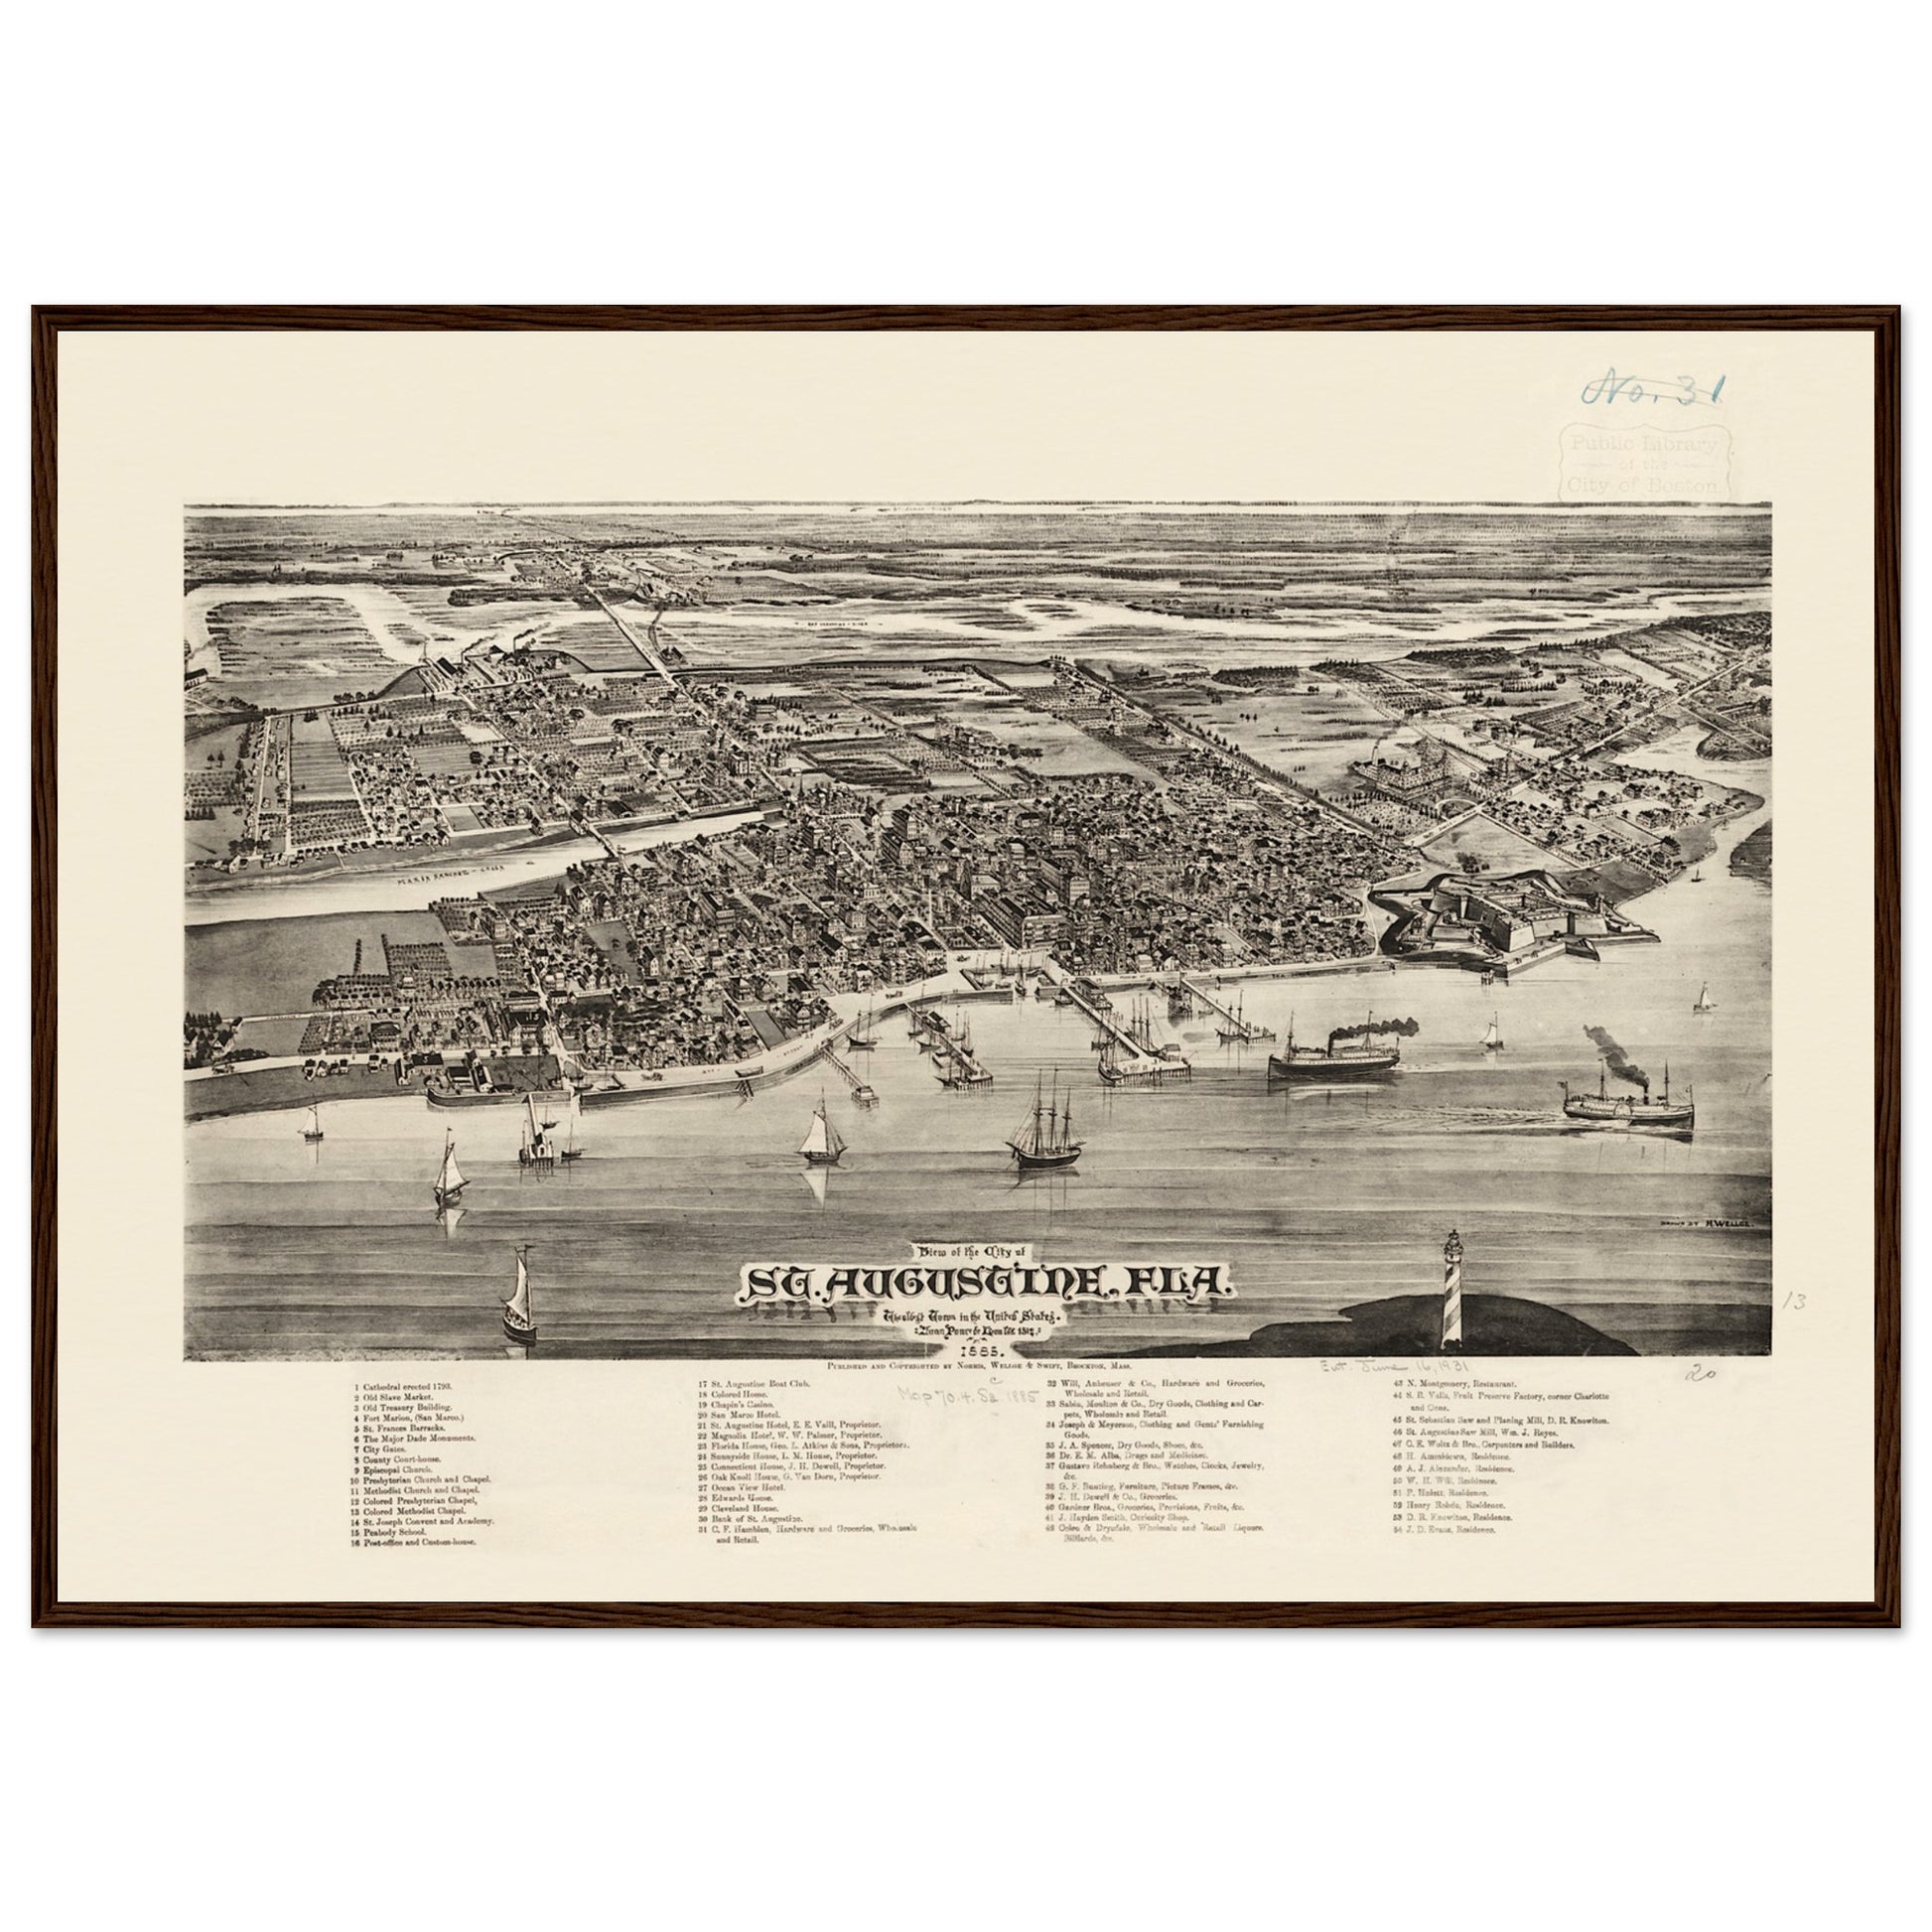 Aerial depiction of Saint Augustine, Florida from 1885.